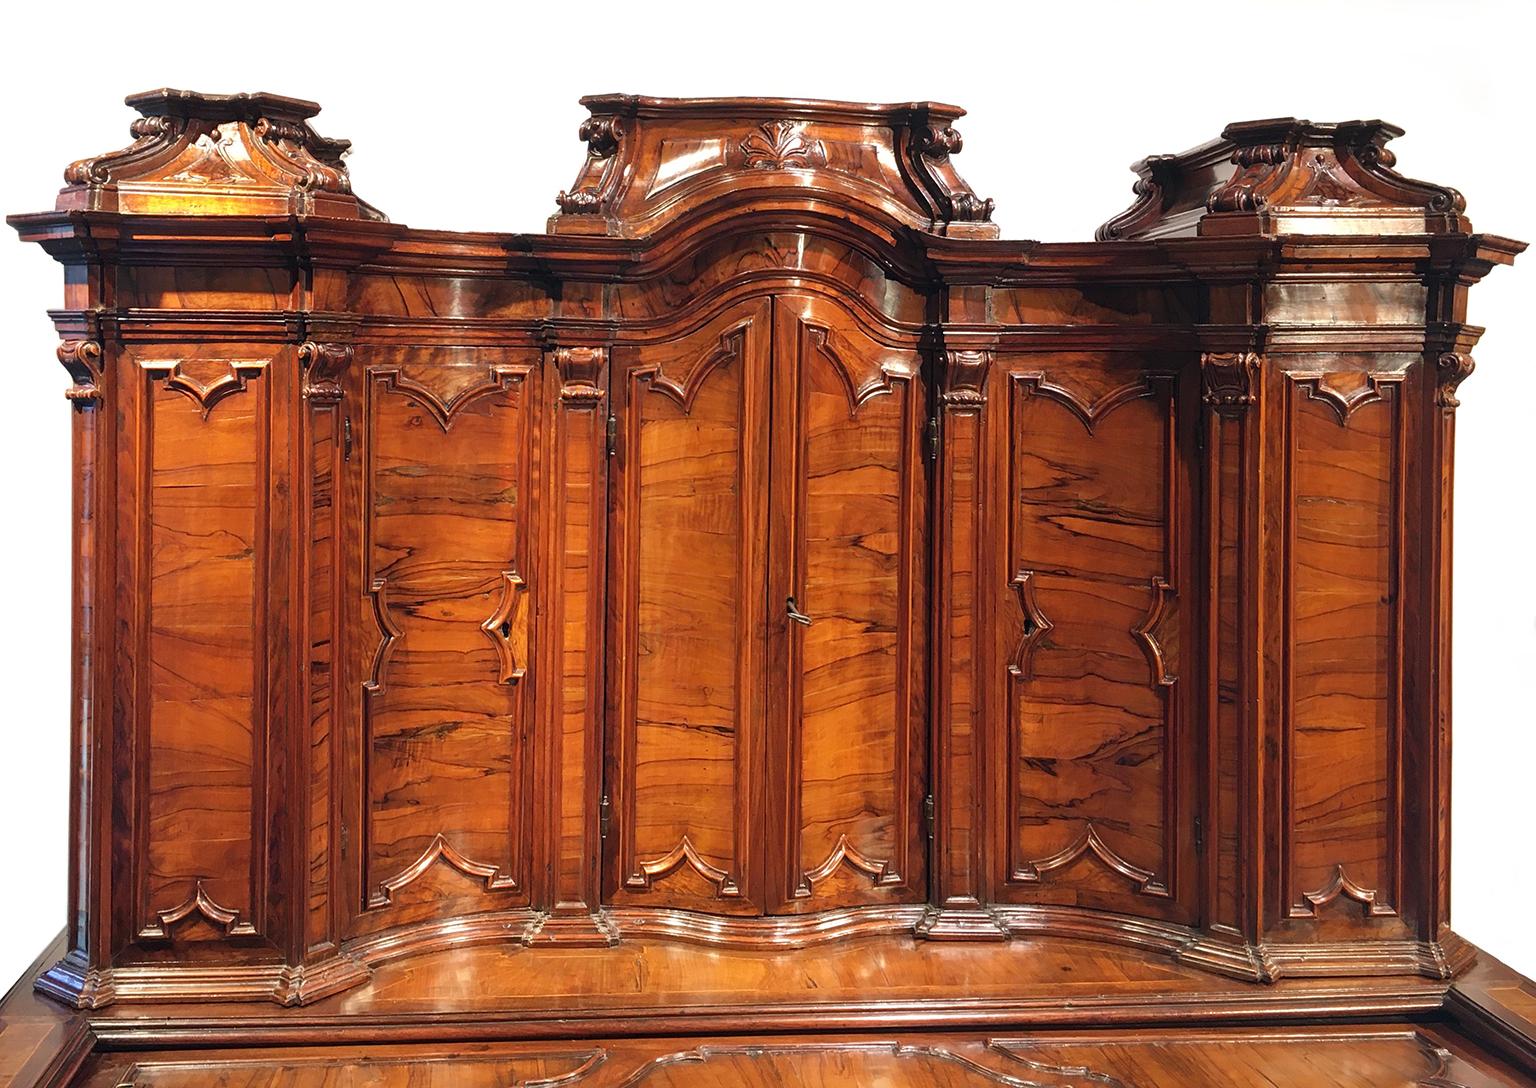 Writing desk with upper cabinet
Milan, first half of the 18th century 
Carved walnut partially veneered in olive wood and walnut burl; traces of ebonizing.
It measures 66.53 in x 48.42 in x 23.22 in (169 x 123 x 59 cm)
State of conservation: